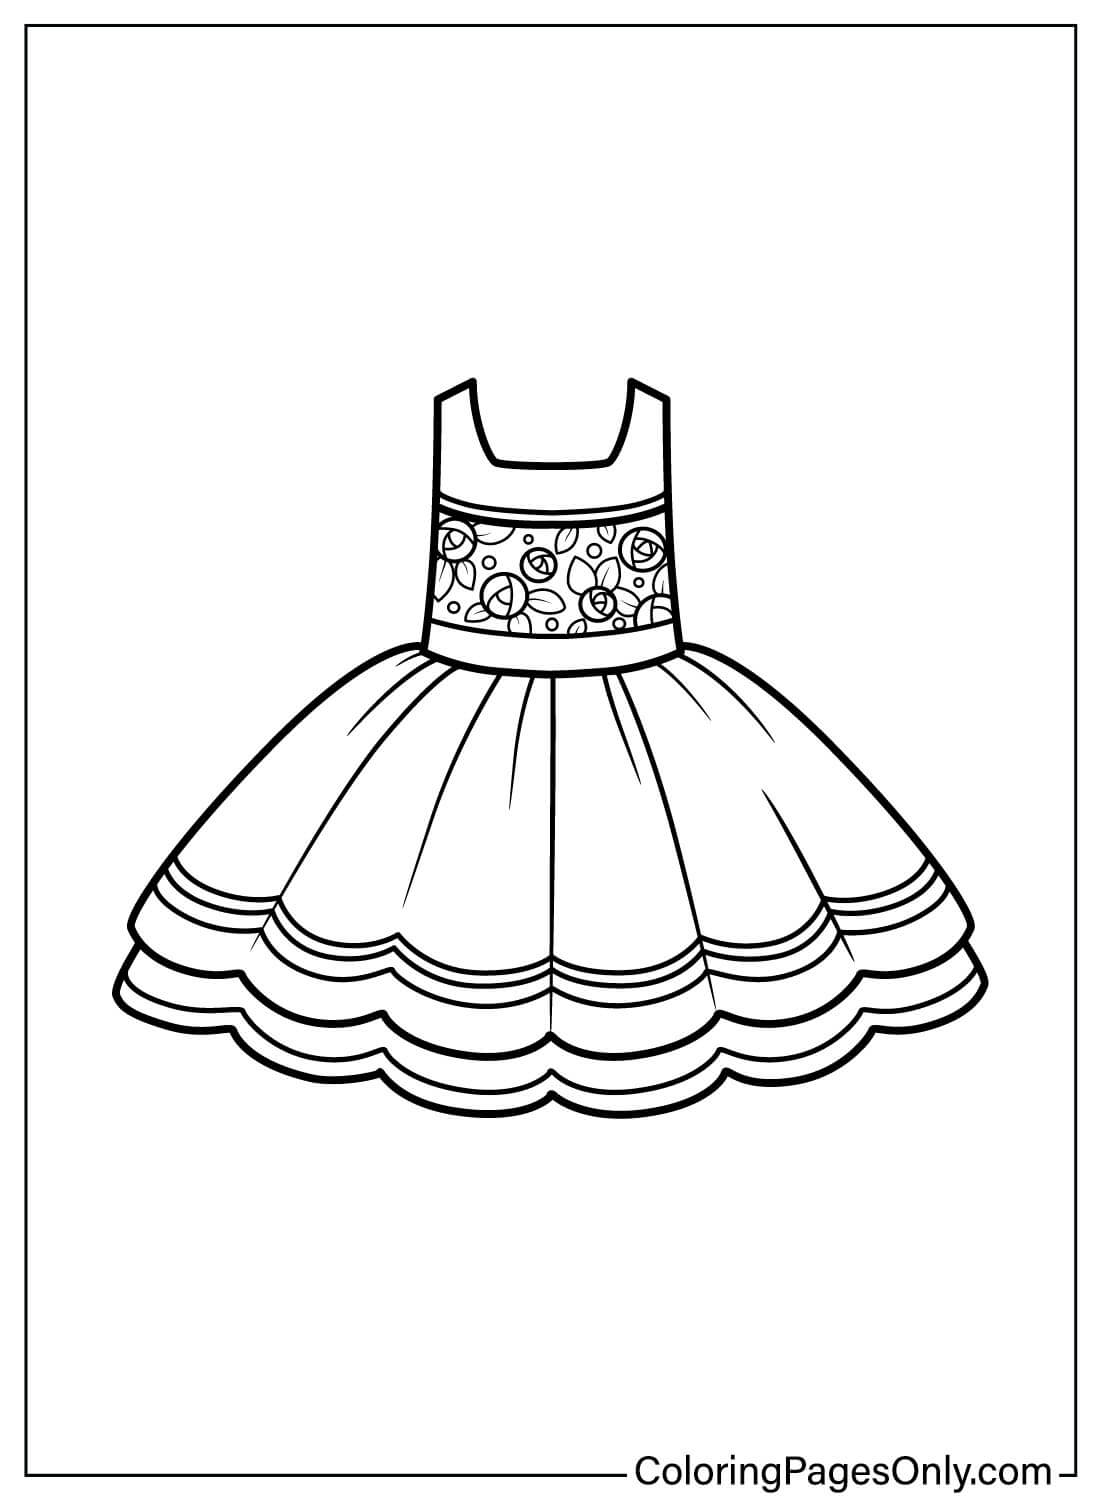 Baby Dress Coloring Sheet - Free Printable Coloring Pages